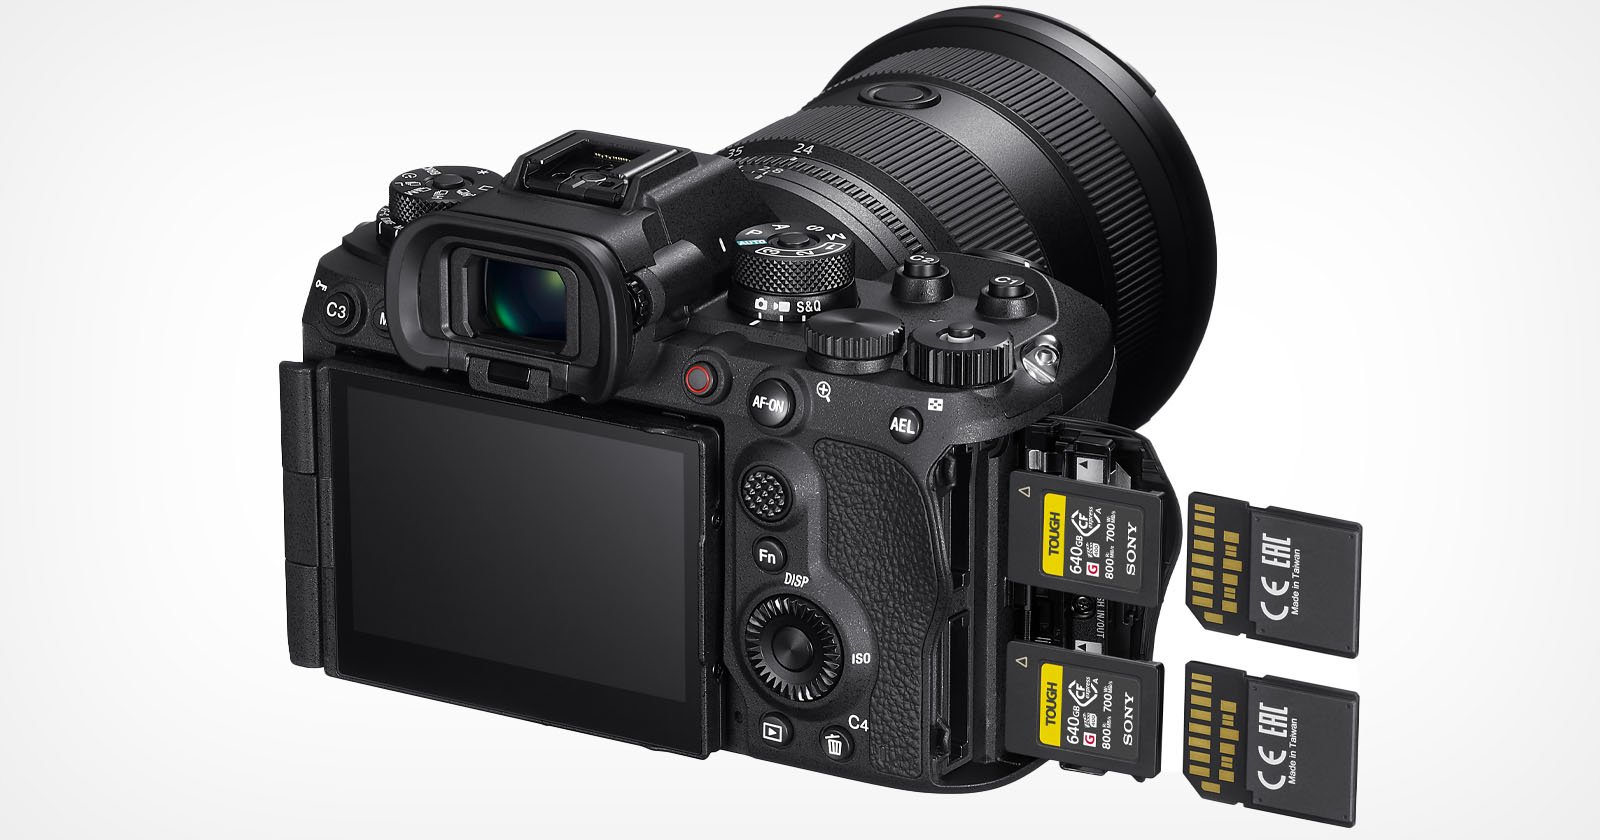 Sony’s a9 III Uses Last-Gen Memory Cards, Creating an Irritating Bottleneck